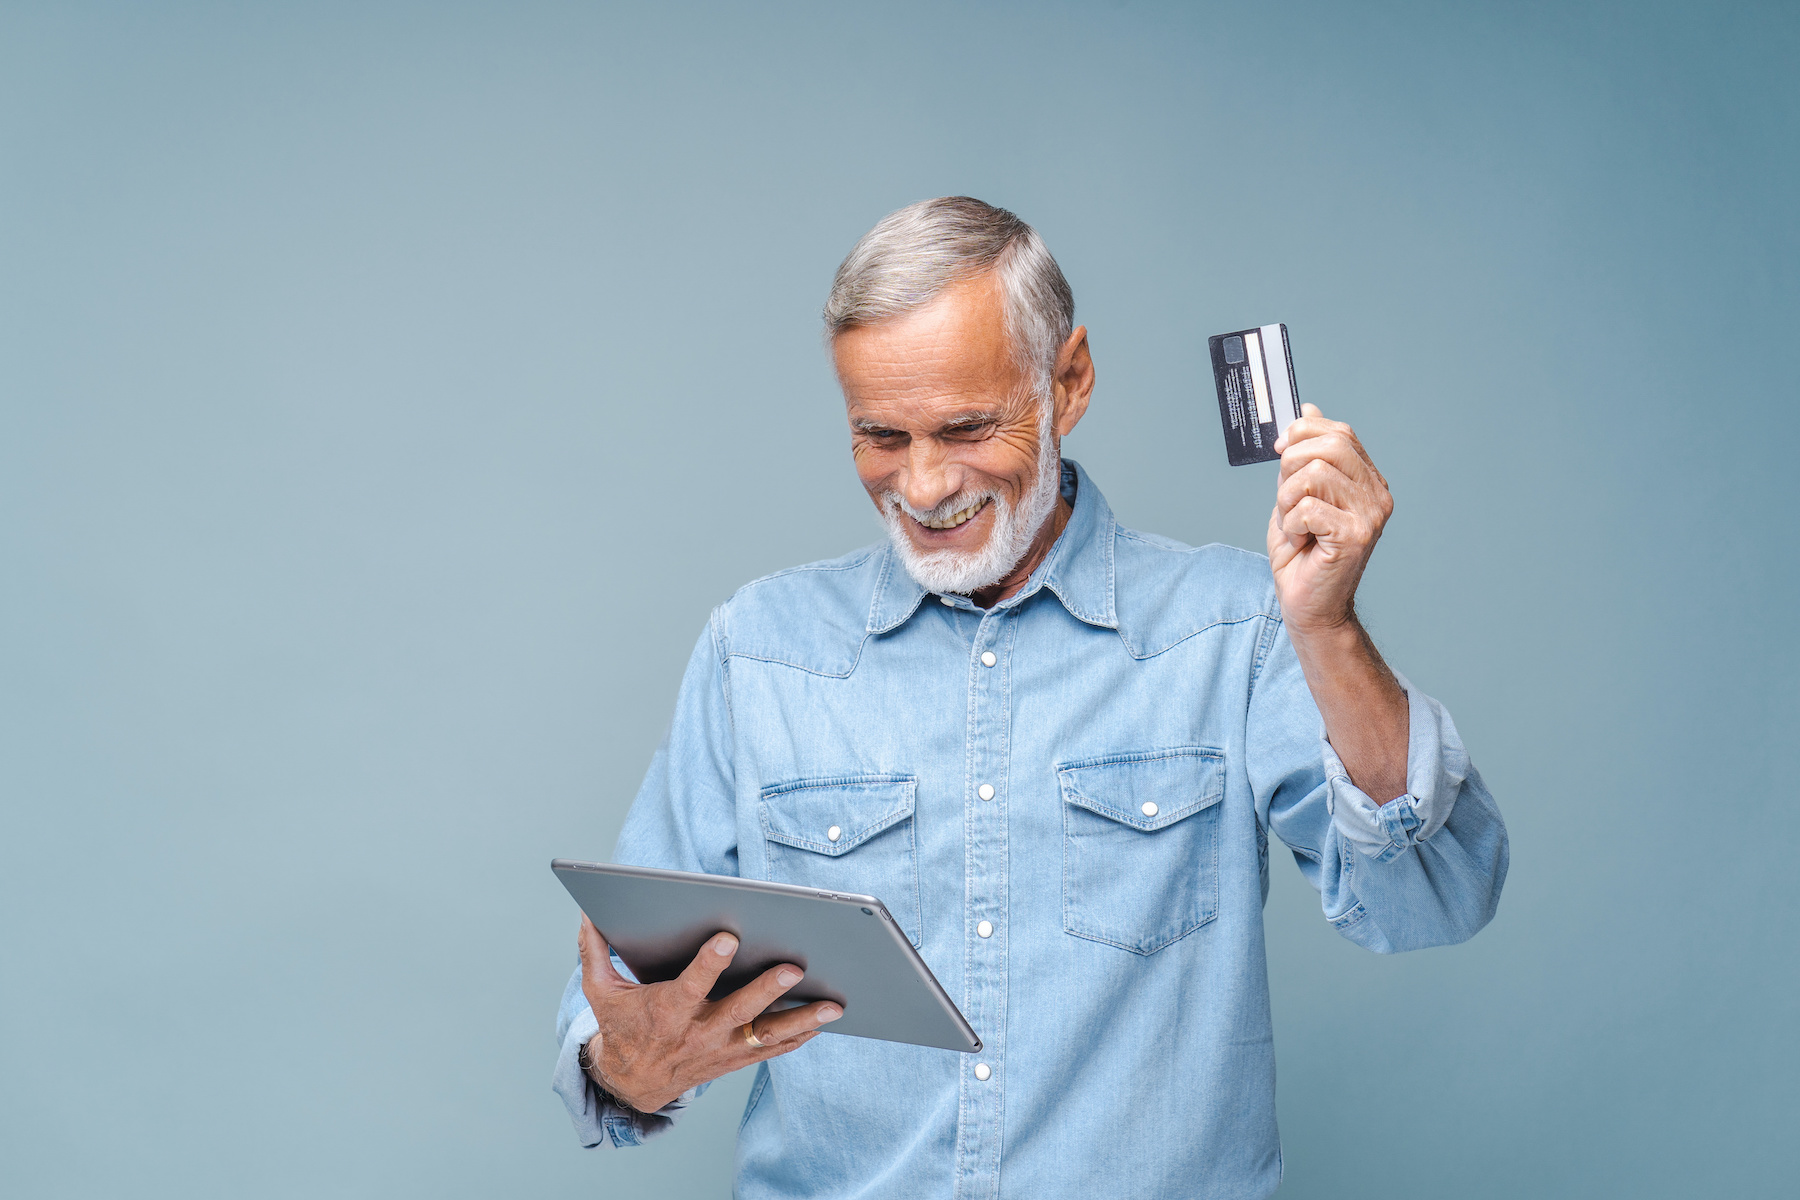 Pros and cons of digital payments for older people